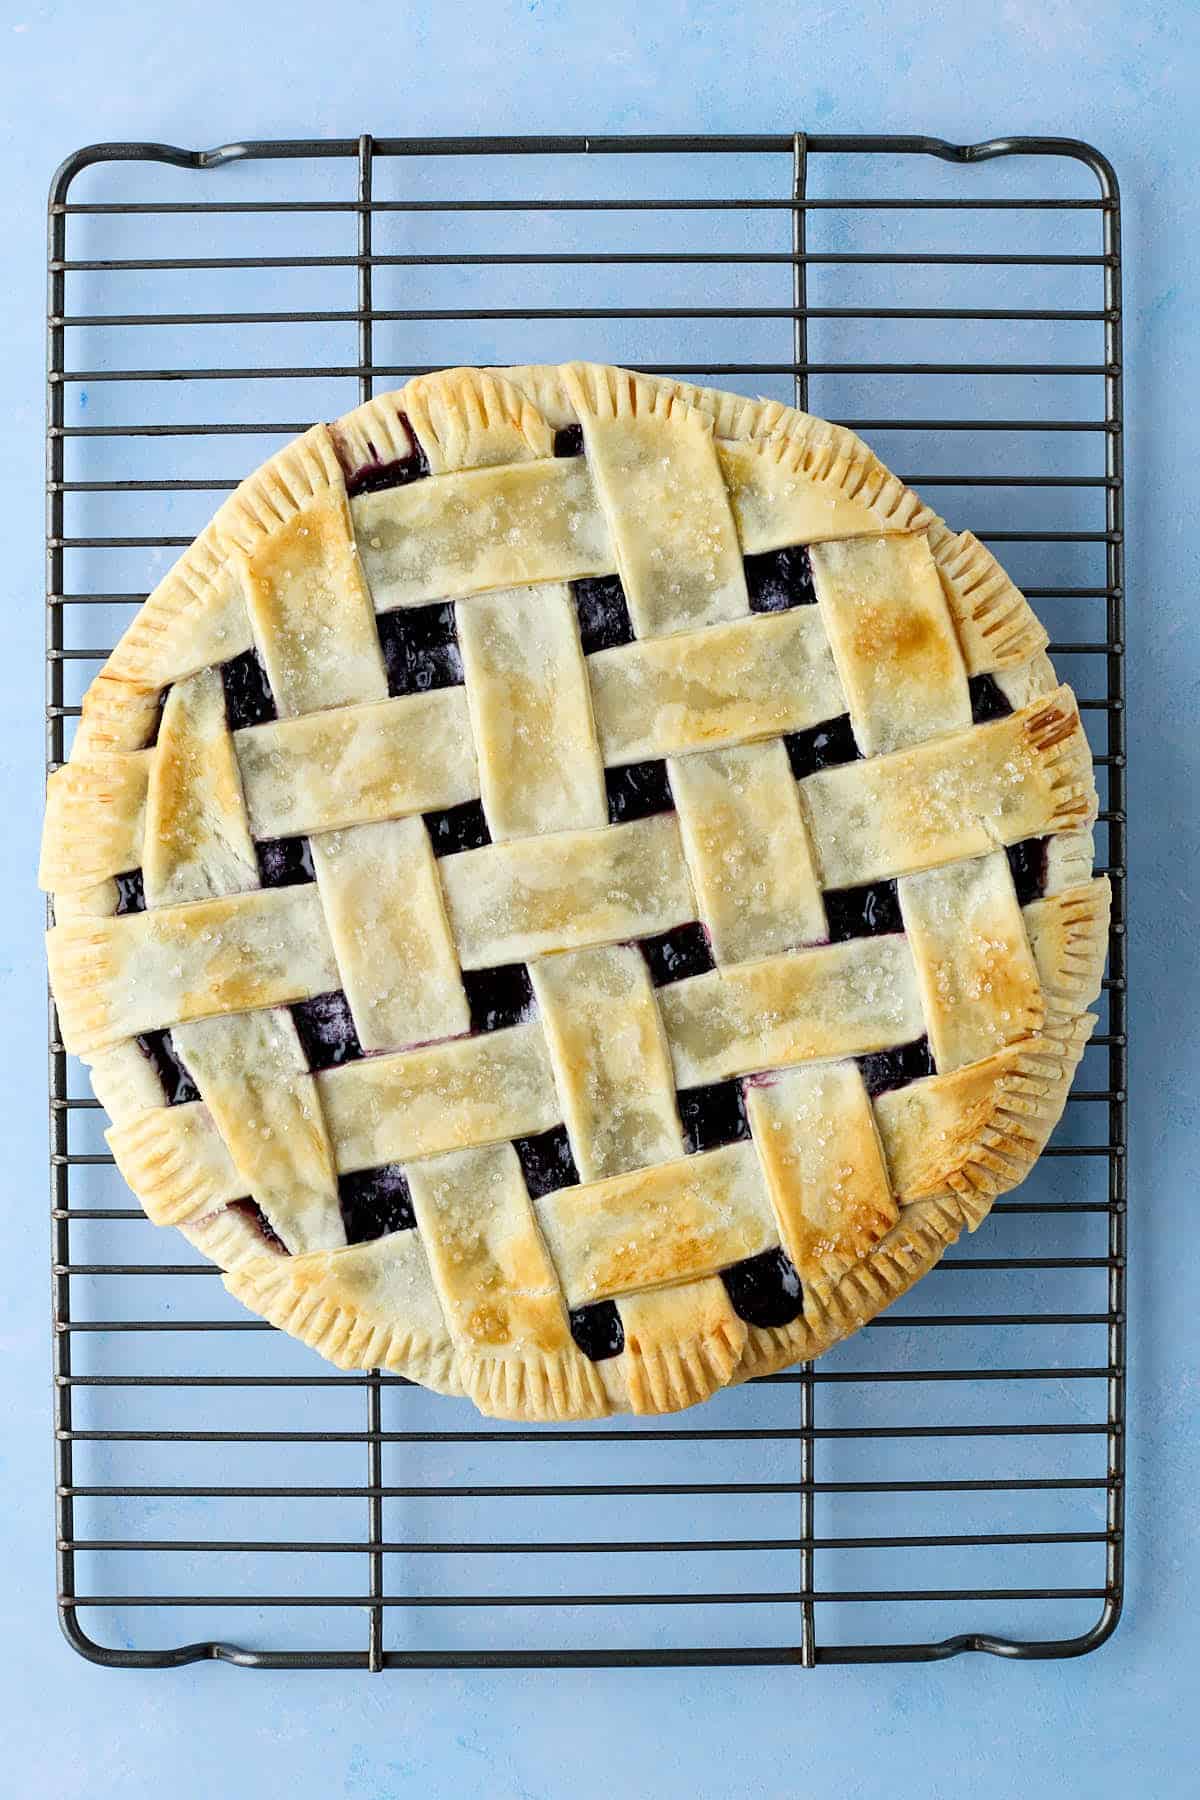 Baked blueberry pie cooling on a wire rack.